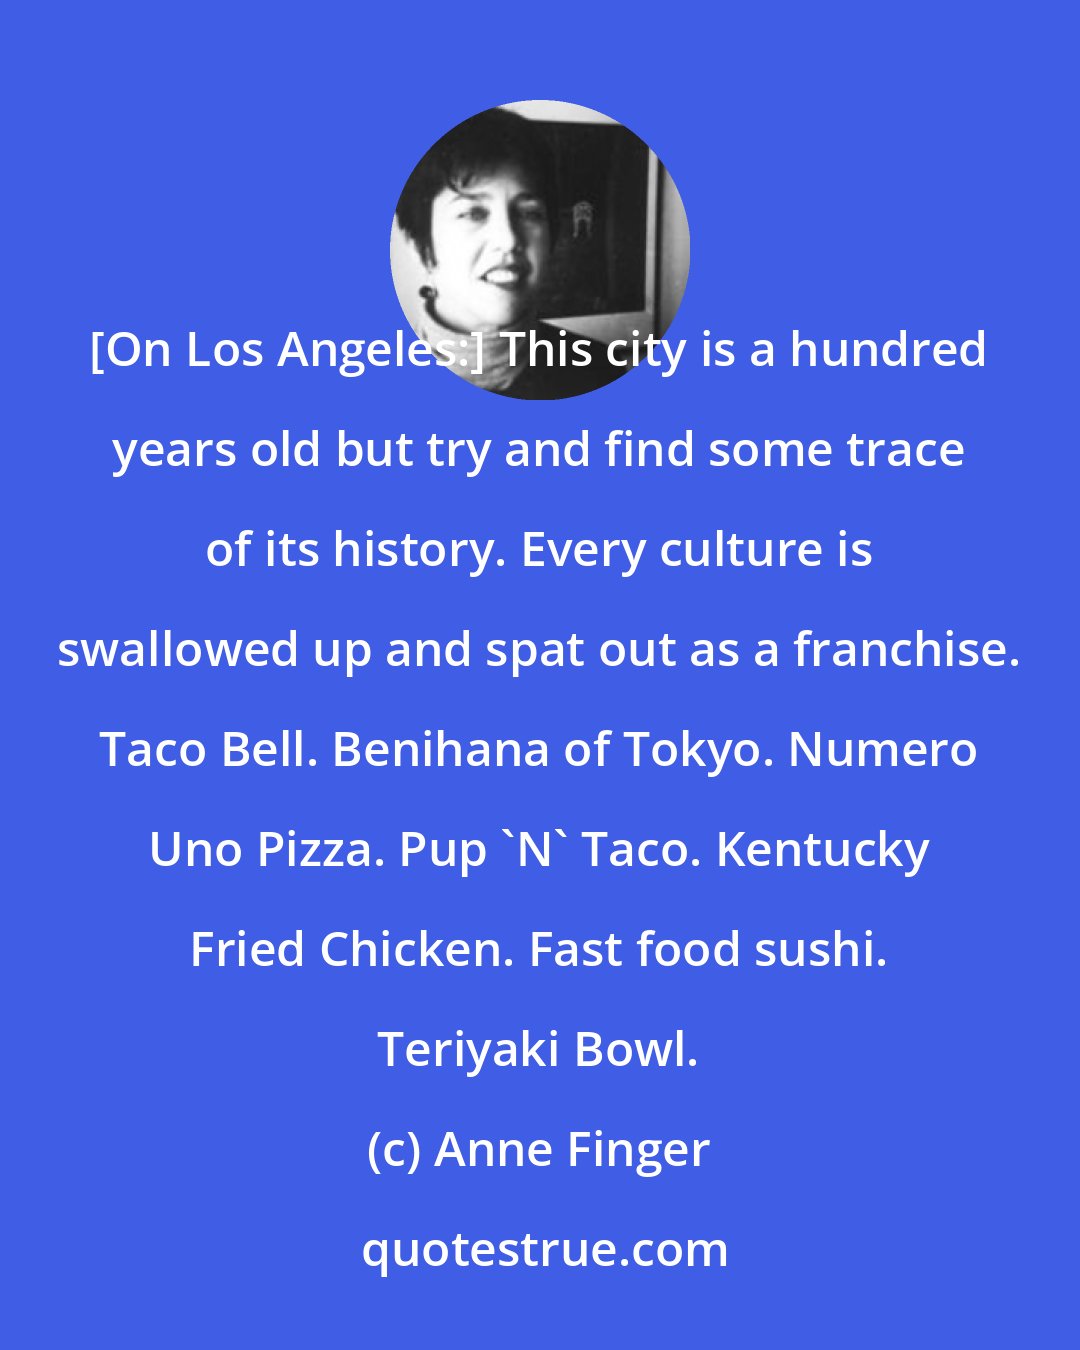 Anne Finger: [On Los Angeles:] This city is a hundred years old but try and find some trace of its history. Every culture is swallowed up and spat out as a franchise. Taco Bell. Benihana of Tokyo. Numero Uno Pizza. Pup 'N' Taco. Kentucky Fried Chicken. Fast food sushi. Teriyaki Bowl.